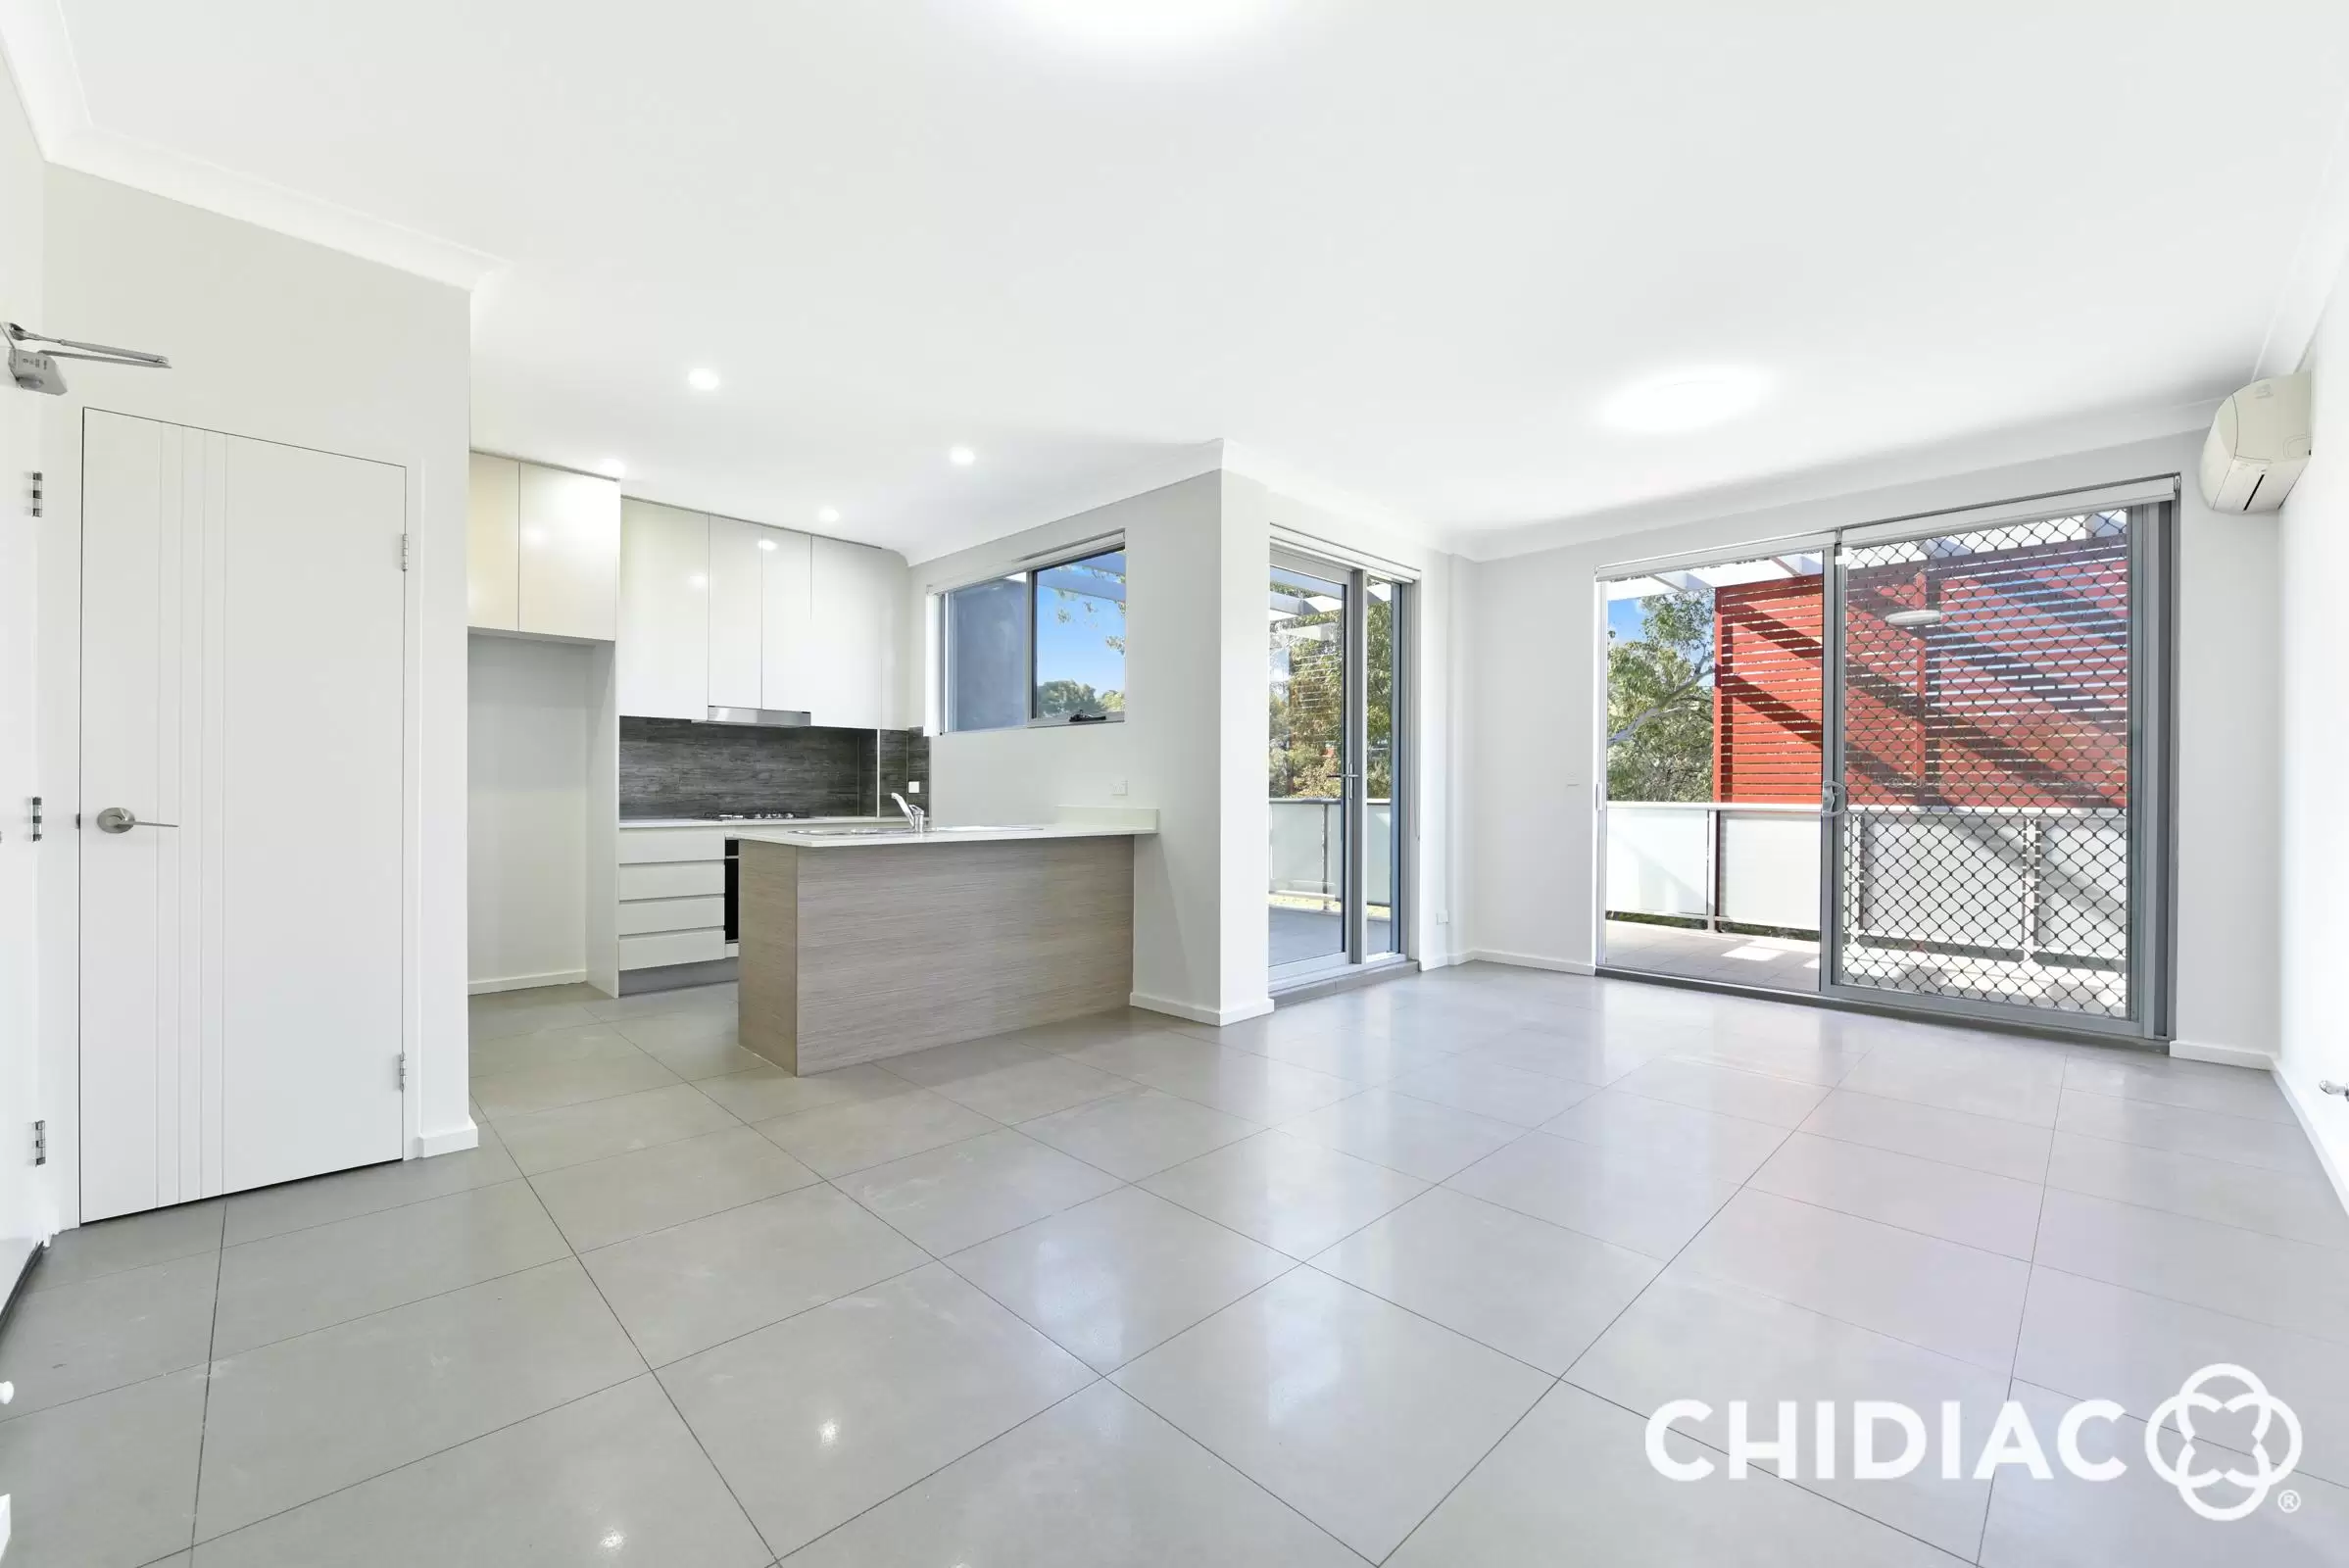 13/22 Burbang Crescent, Rydalmere Leased by Chidiac Realty - image 2